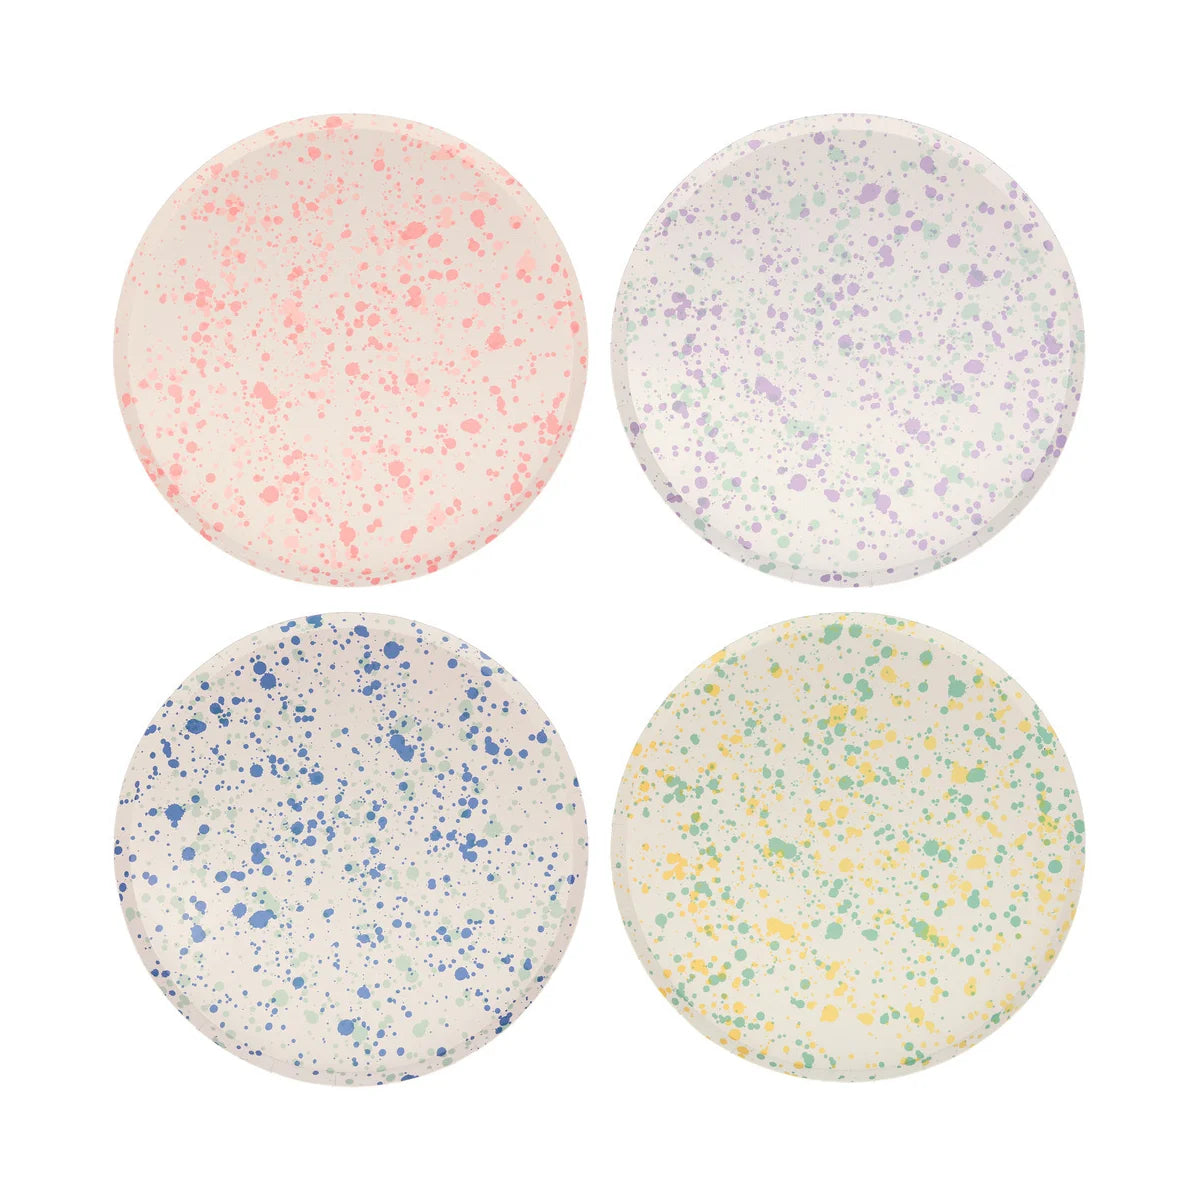 Speckled dinner plates in blue, pink, purple and green, sold at ALittleConfetti. By Meri Meri